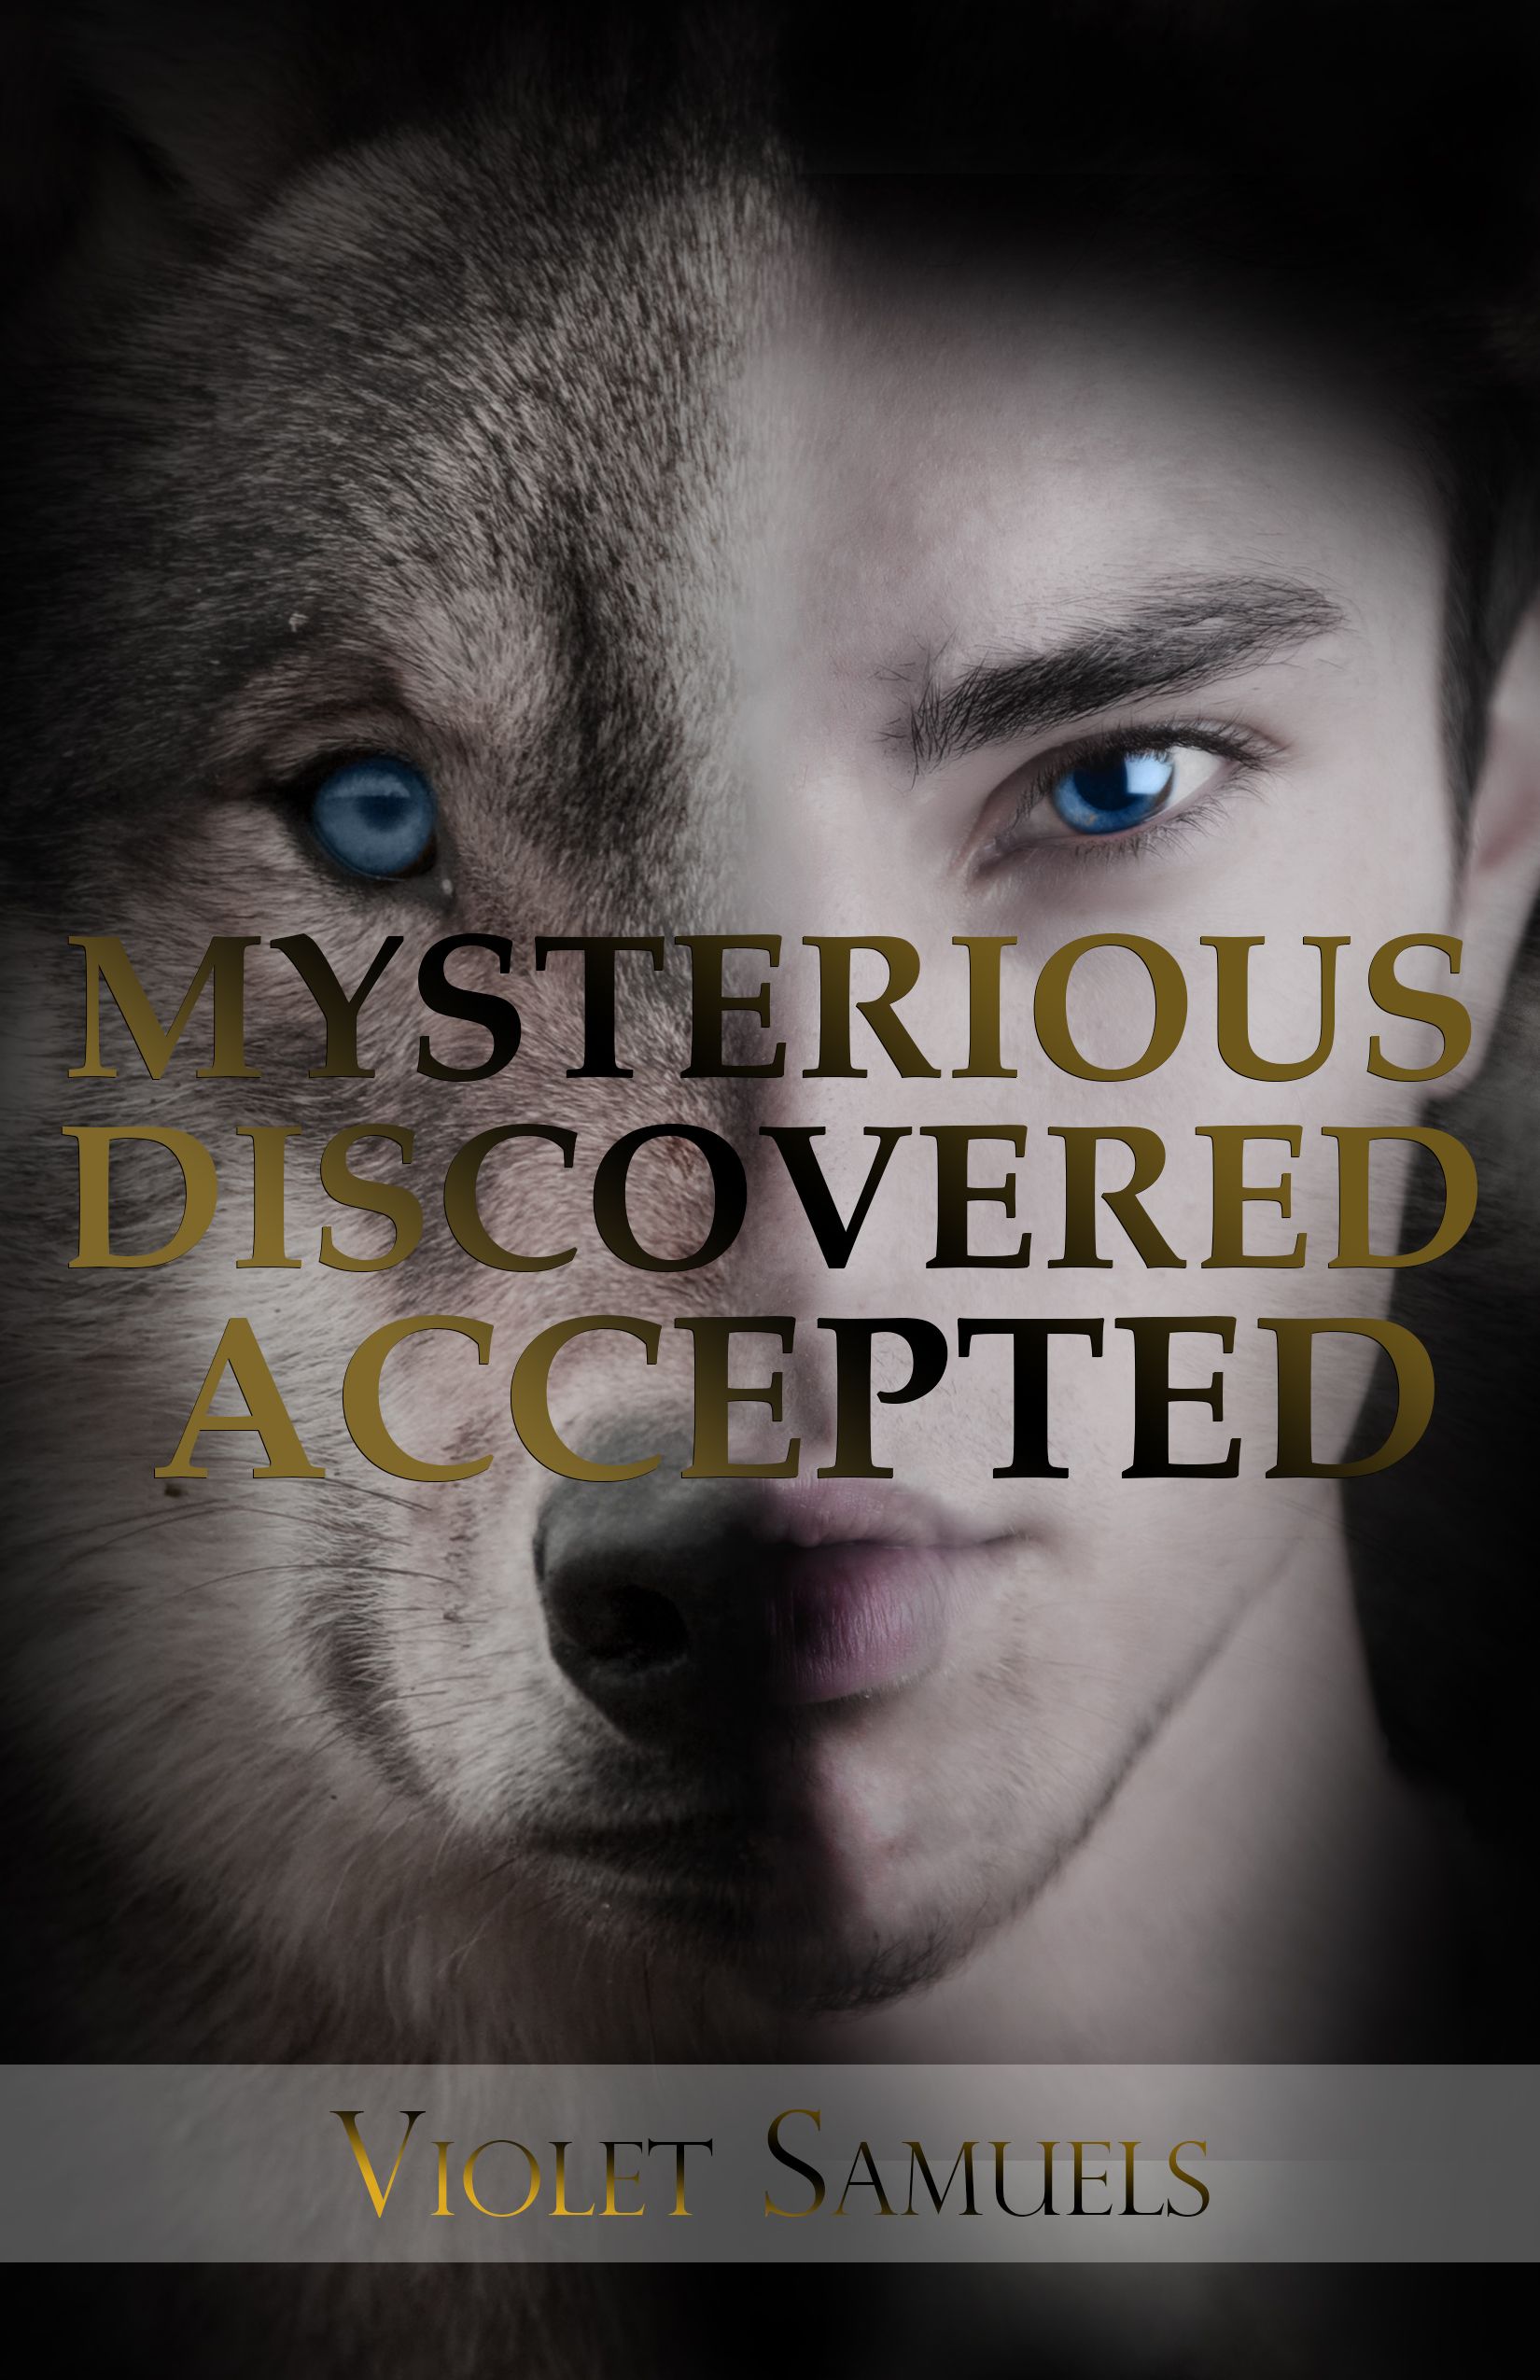 Young adult werewolf books